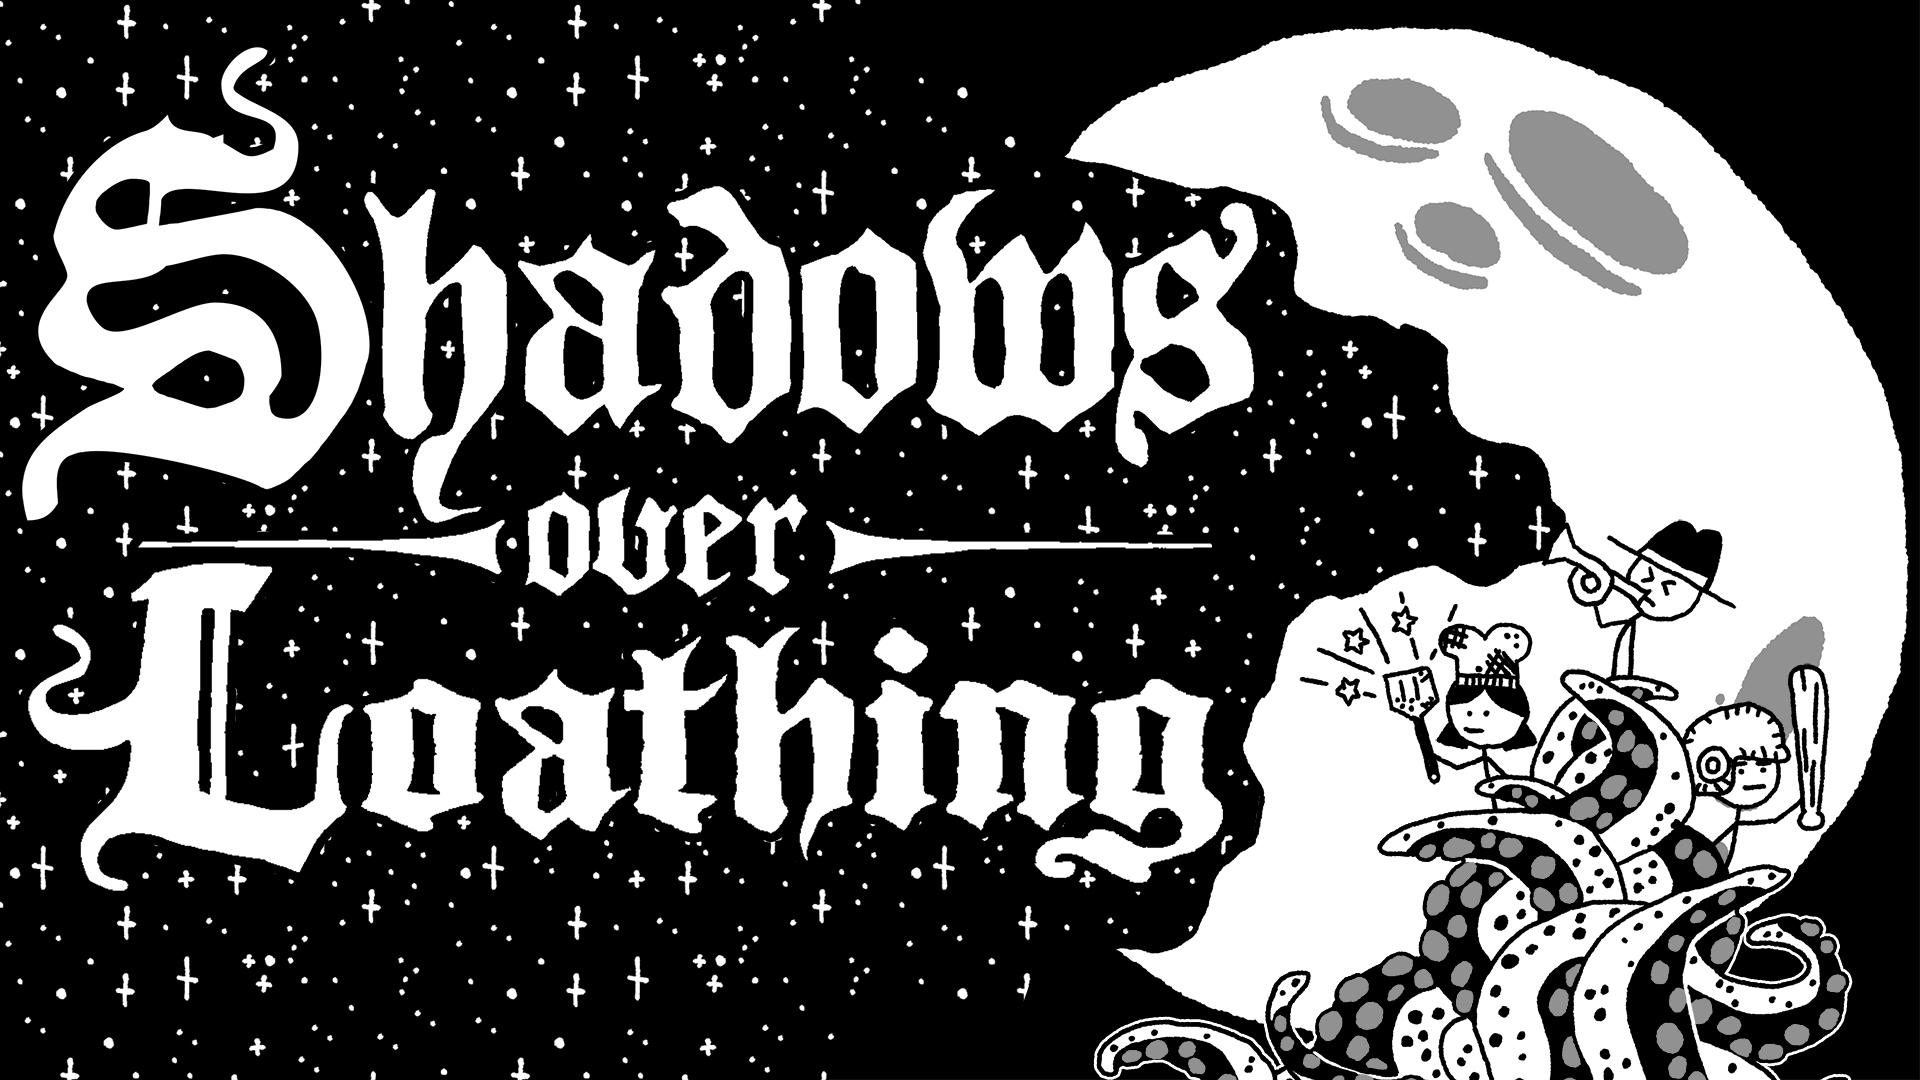 Shadows Over Loathing game